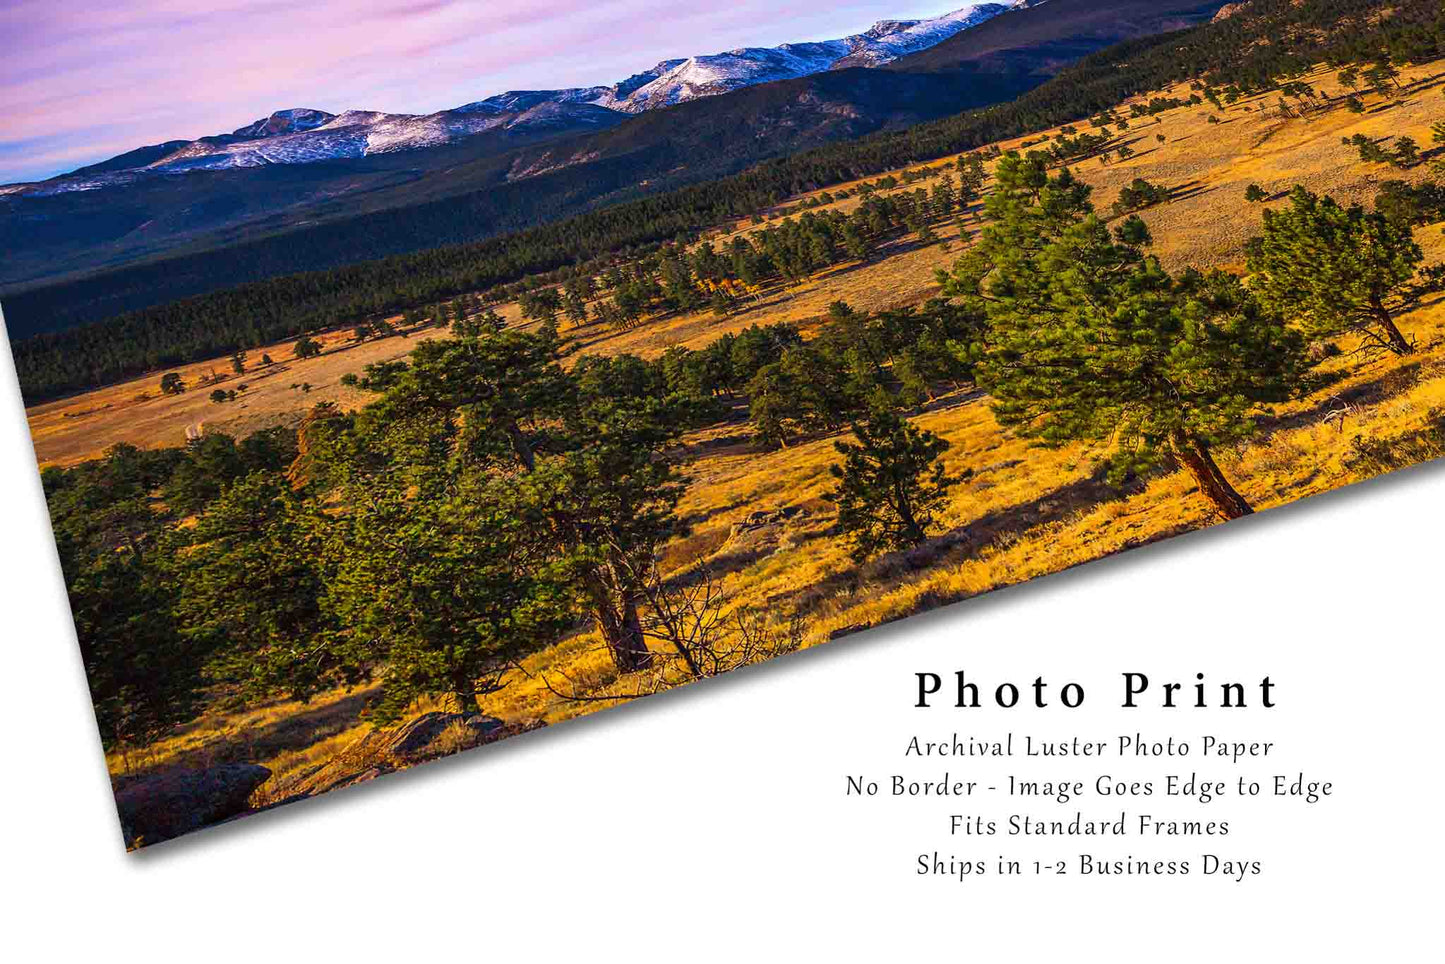 Western Photography Print - Picture of Rocky Mountain Skyline and Valley at Twilight near Estes Park Colorado Landscape Wall Art Photo Decor